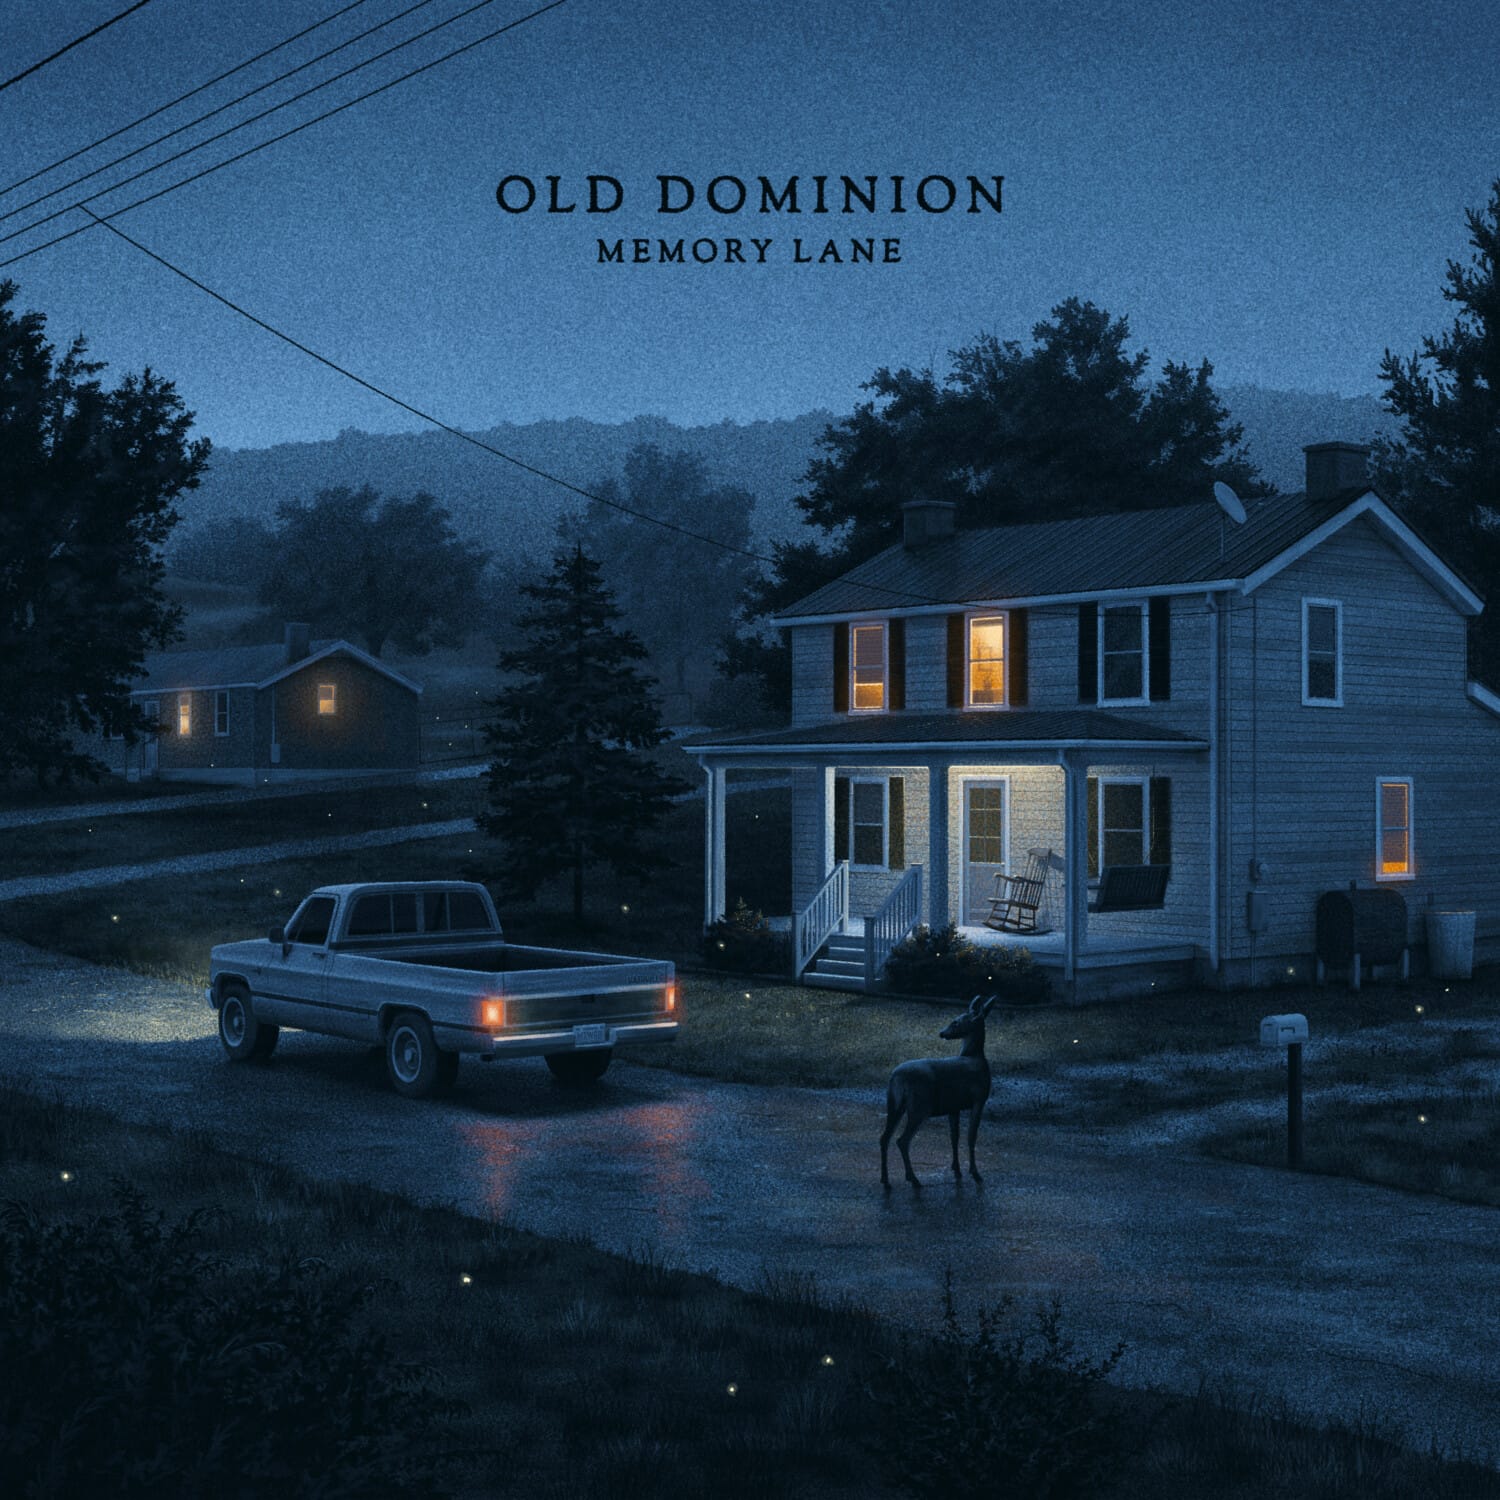 Old Dominion: New Memory Lane